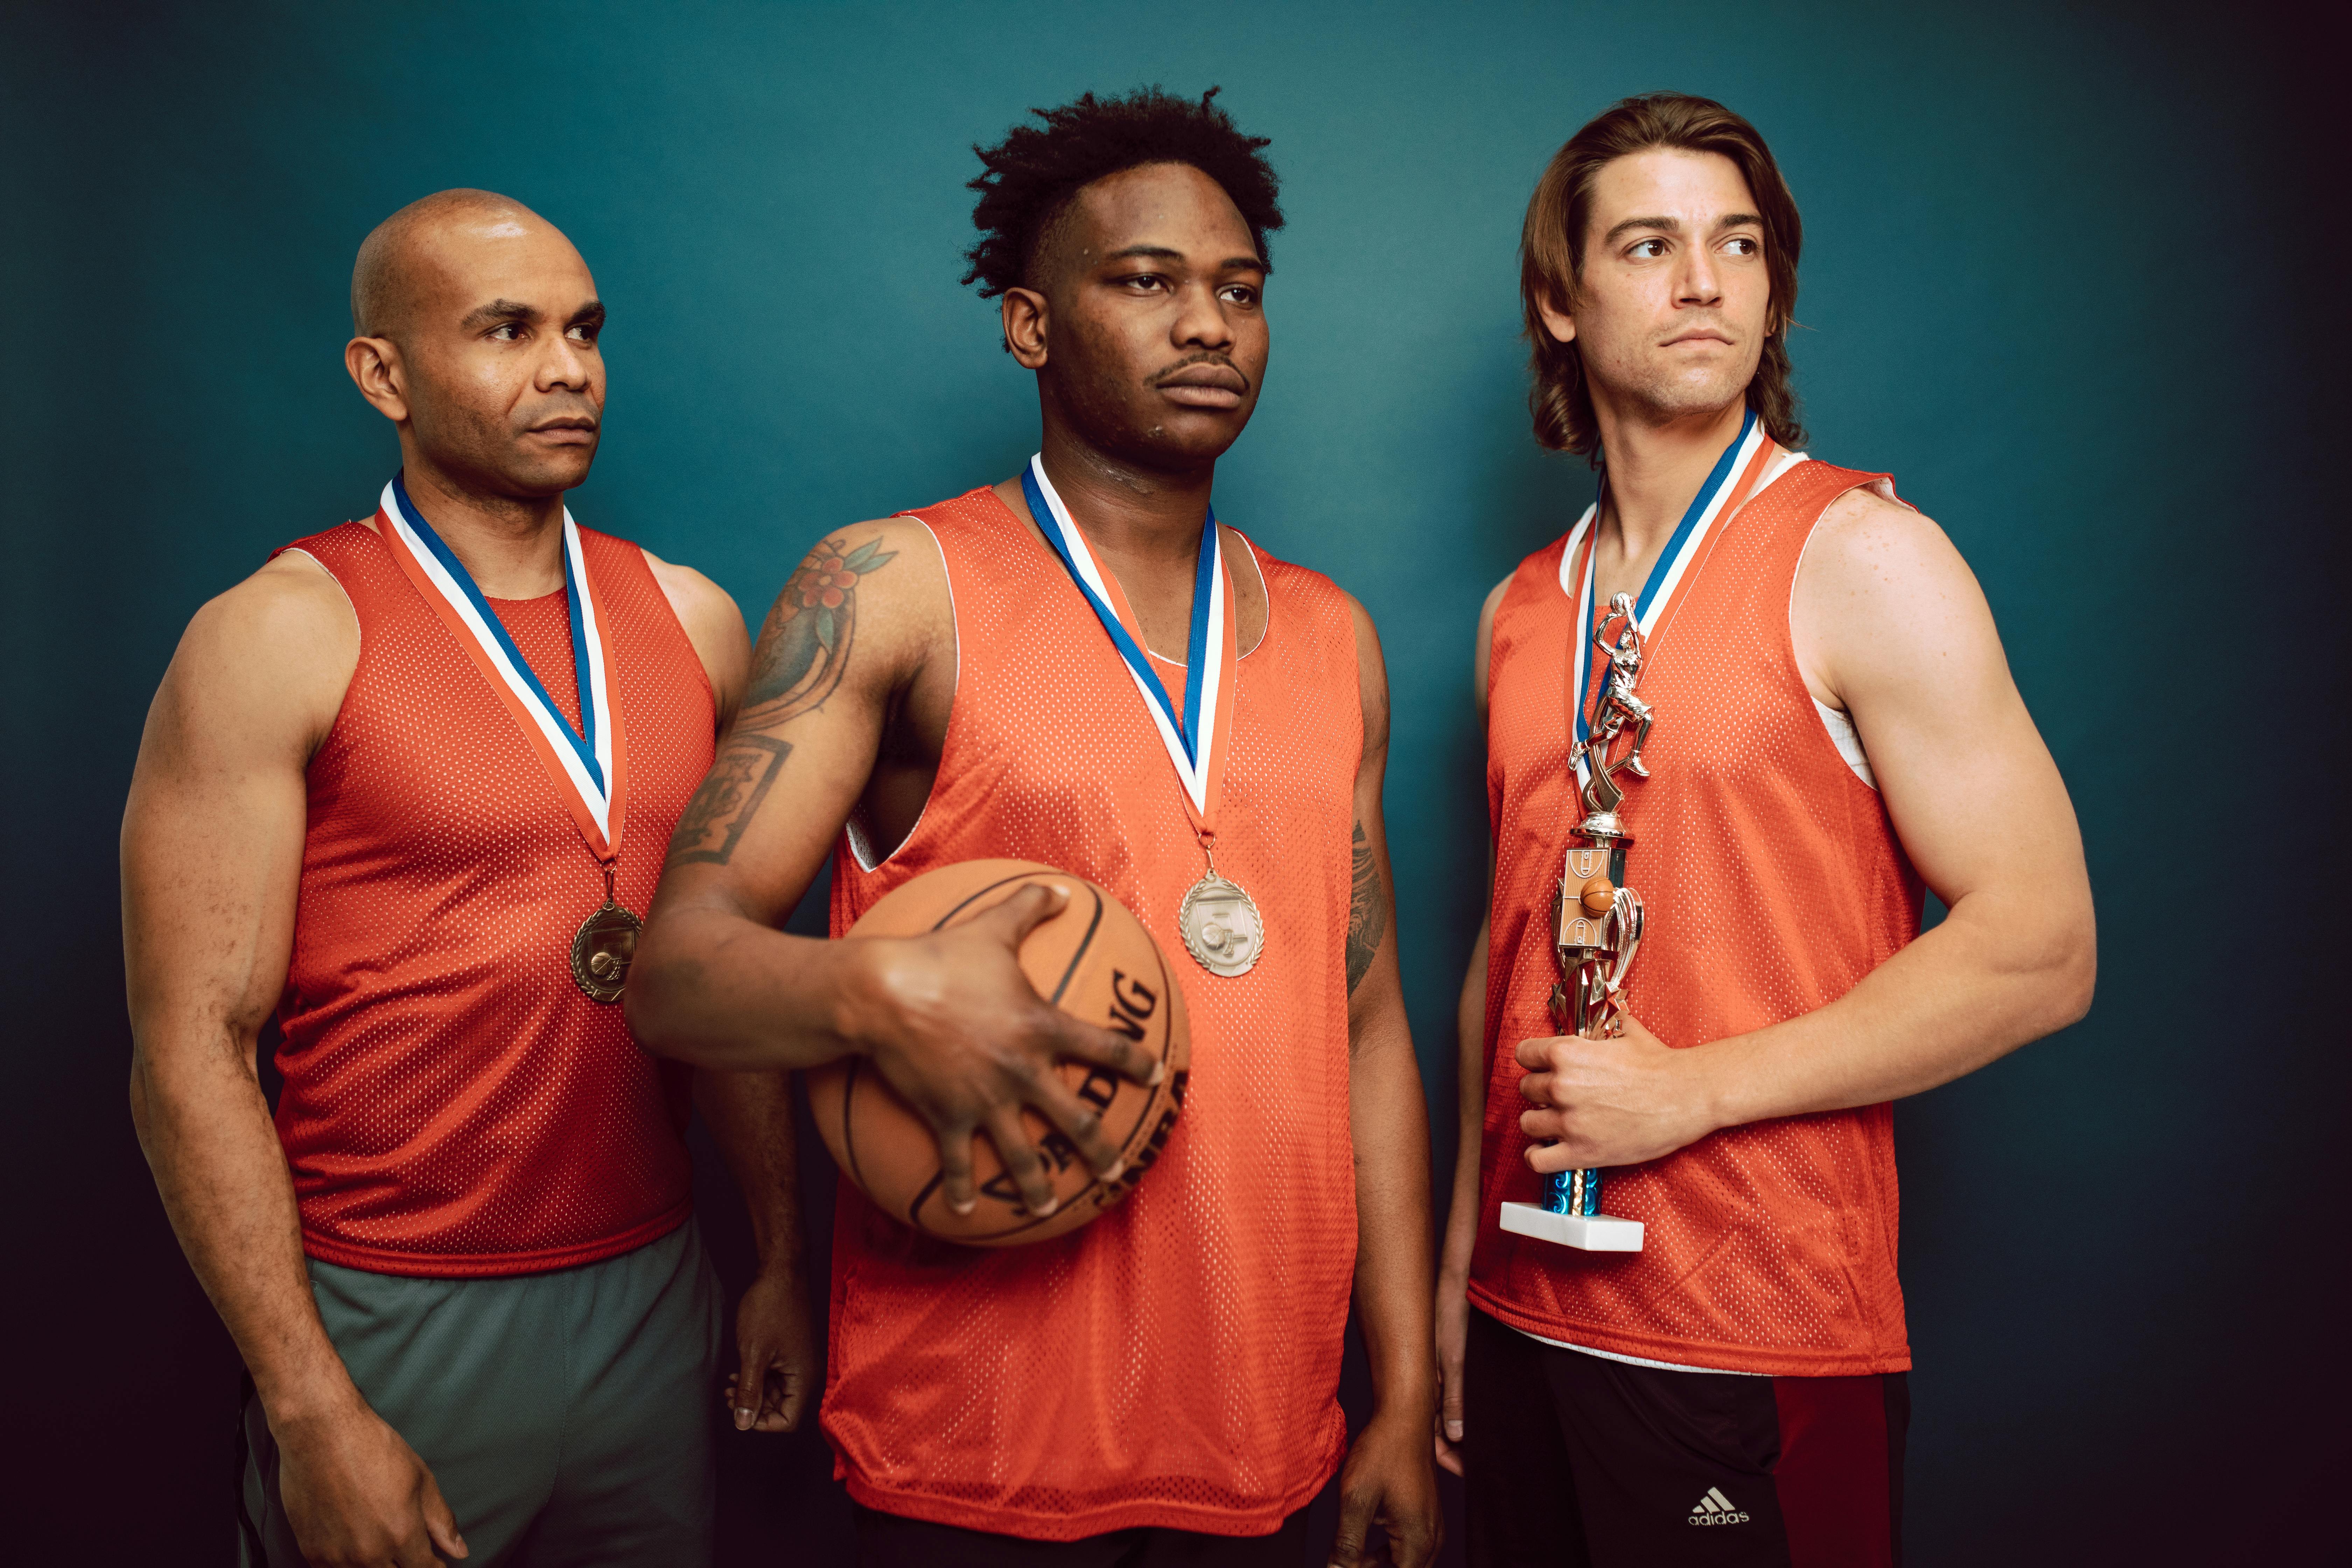 three men wearing medals in orange jersey holding a basketball and trophy